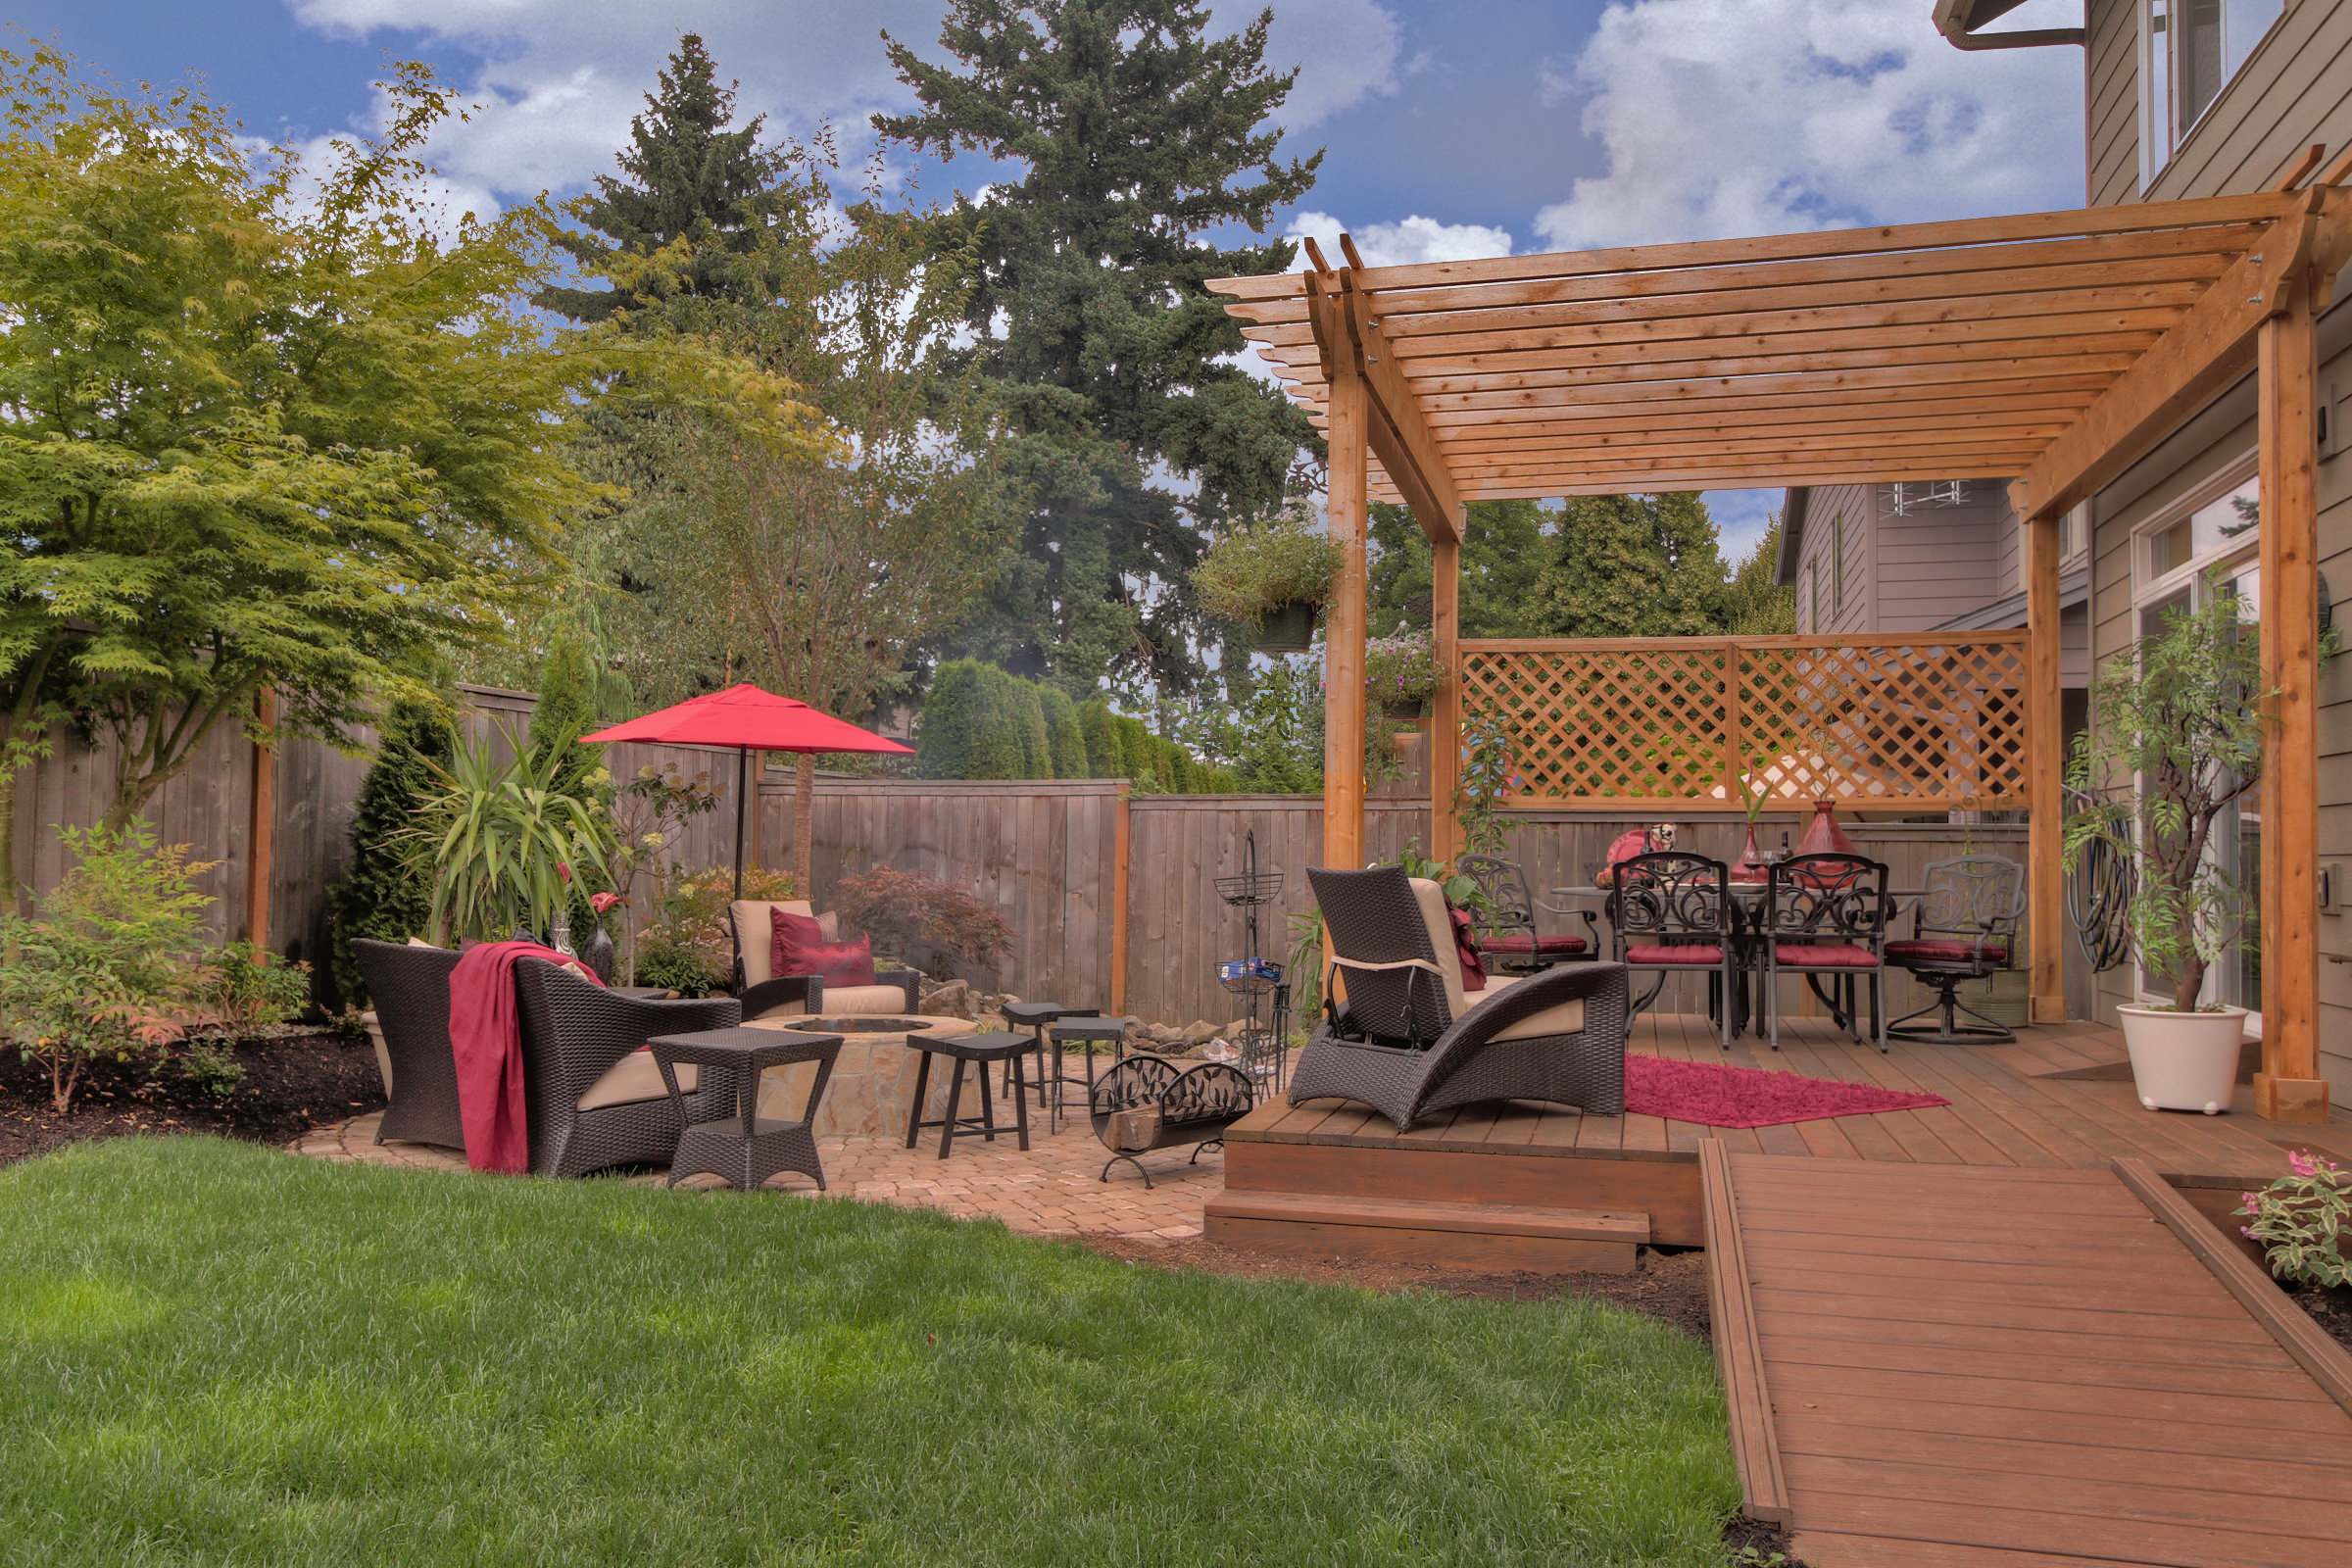 Fire Pit Water Feature Pergola Paver Courtyard Traditional Deck Portland By Paradise Restored Landscaping Exterior Design Houzz